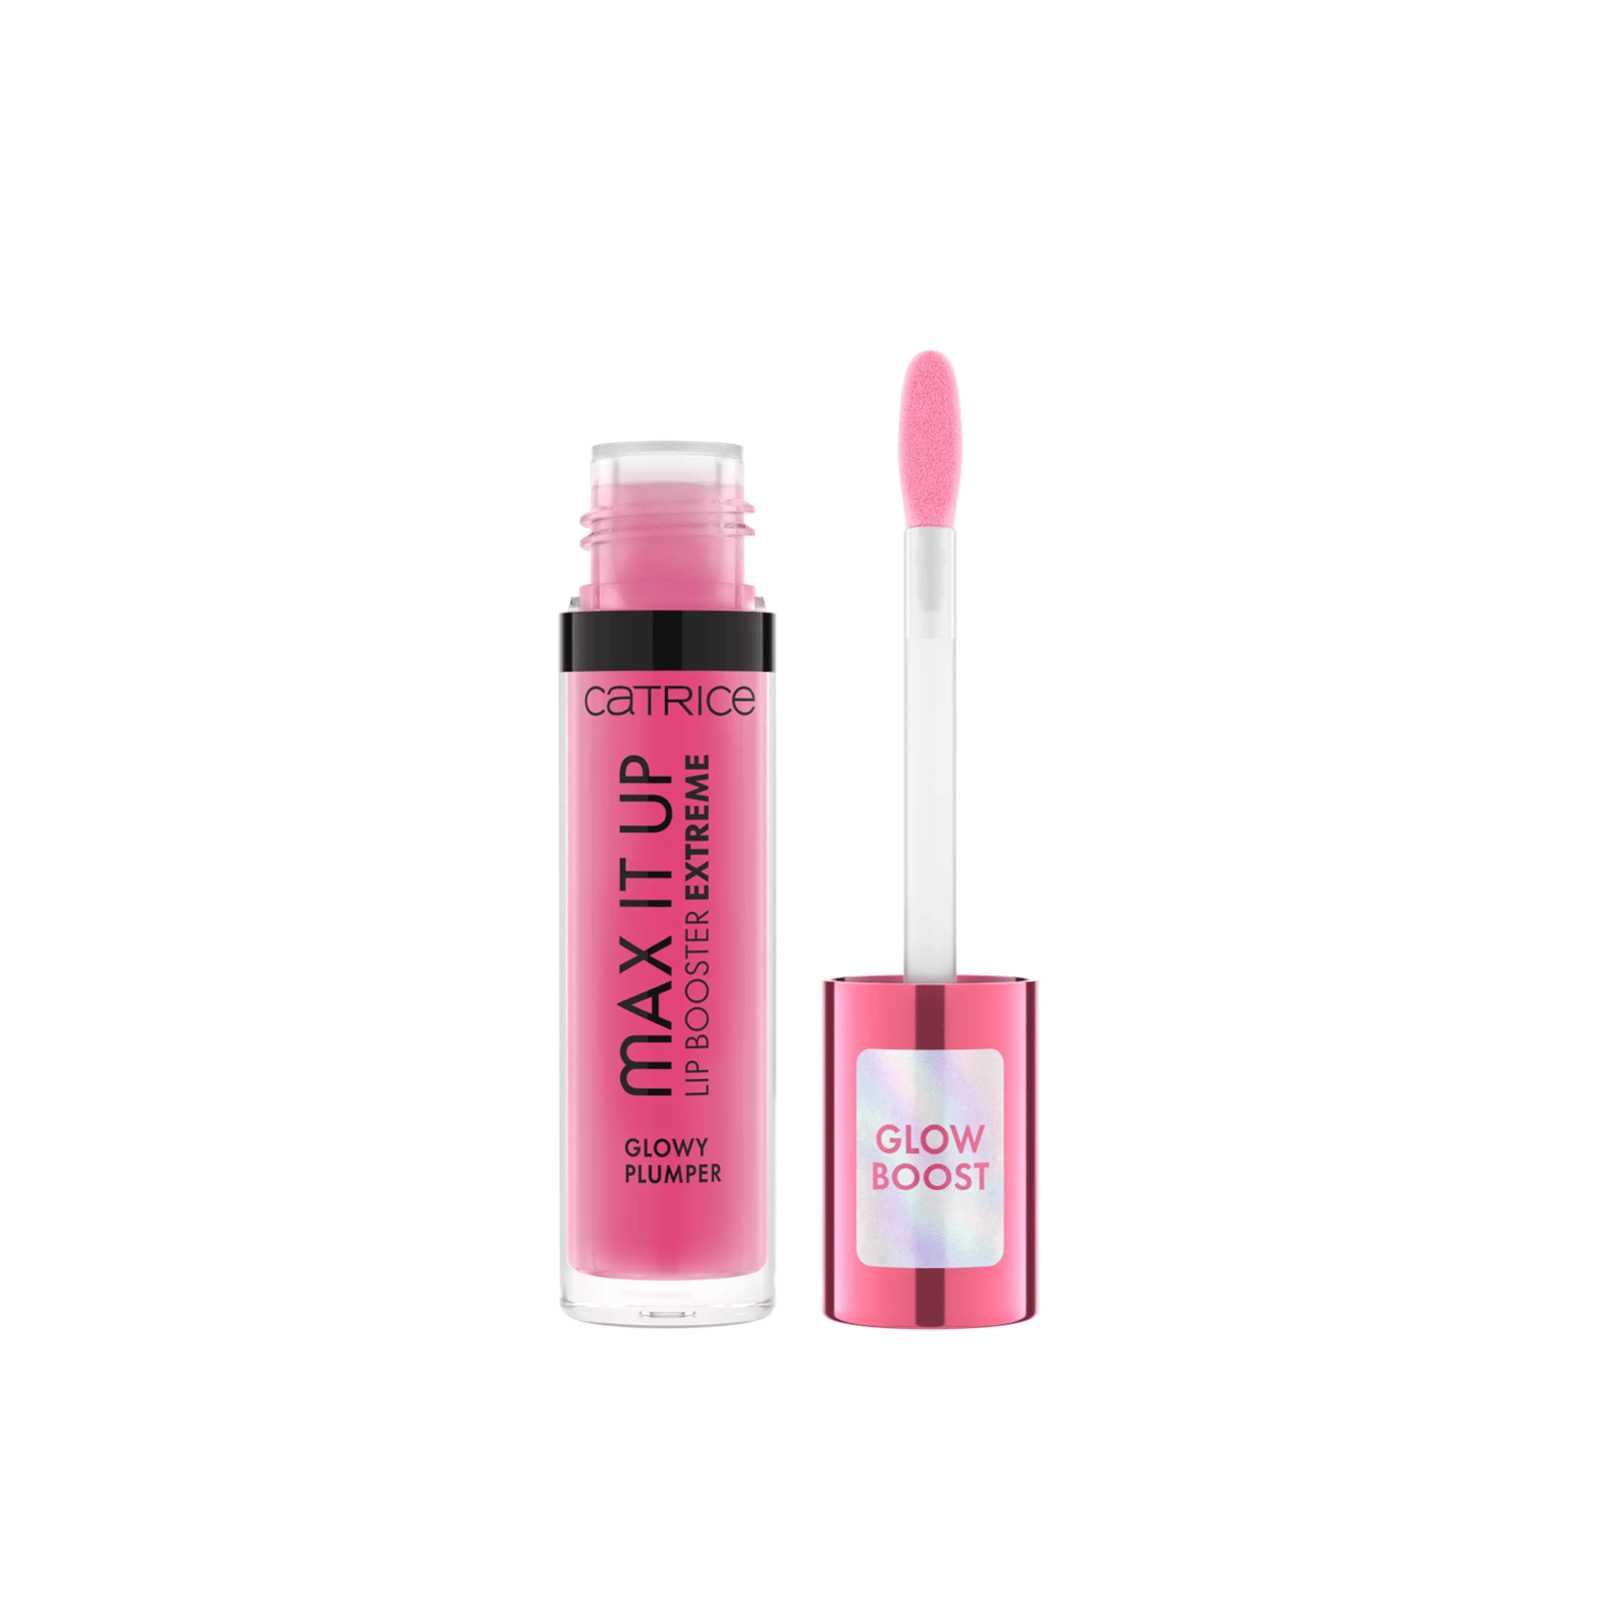 Catrice Max It Up Lip Booster Extreme 040 Glow On Me 4ml (0.13 fl oz)